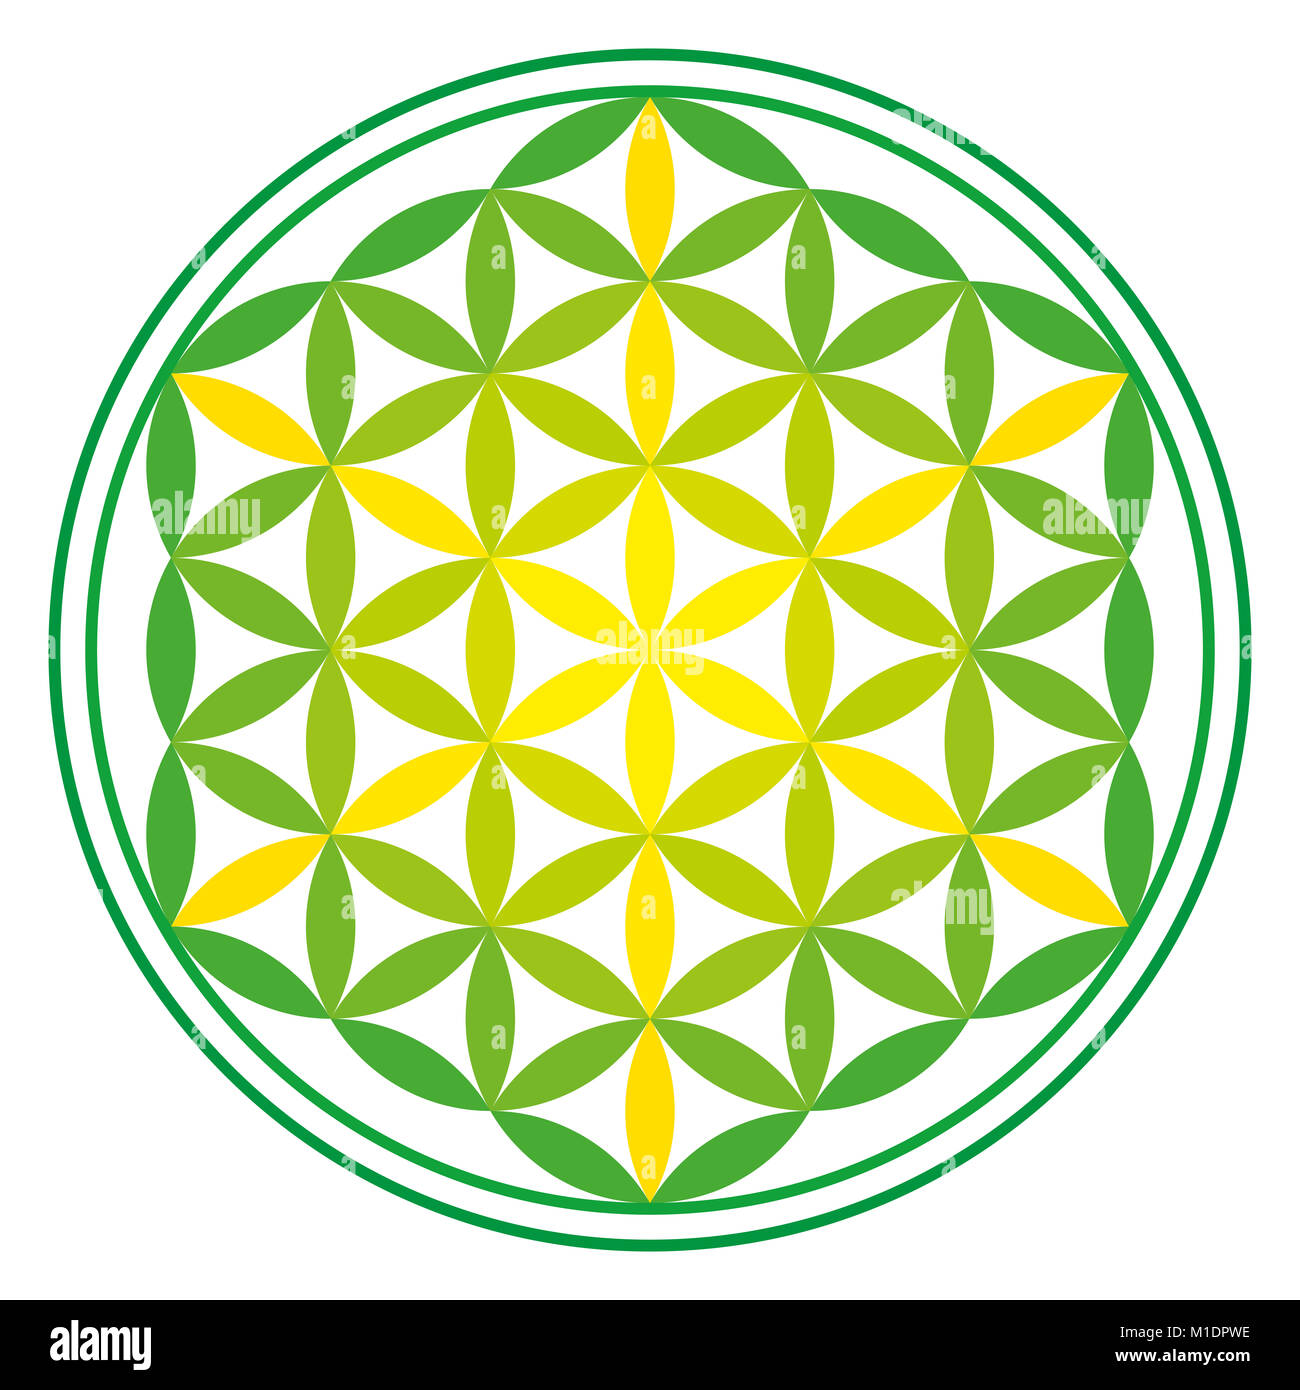 Green Energy Flower of Life over white. Ancient symmetrical symbol, composed of multiple overlapping circles, forming a flower like pattern. Stock Photo